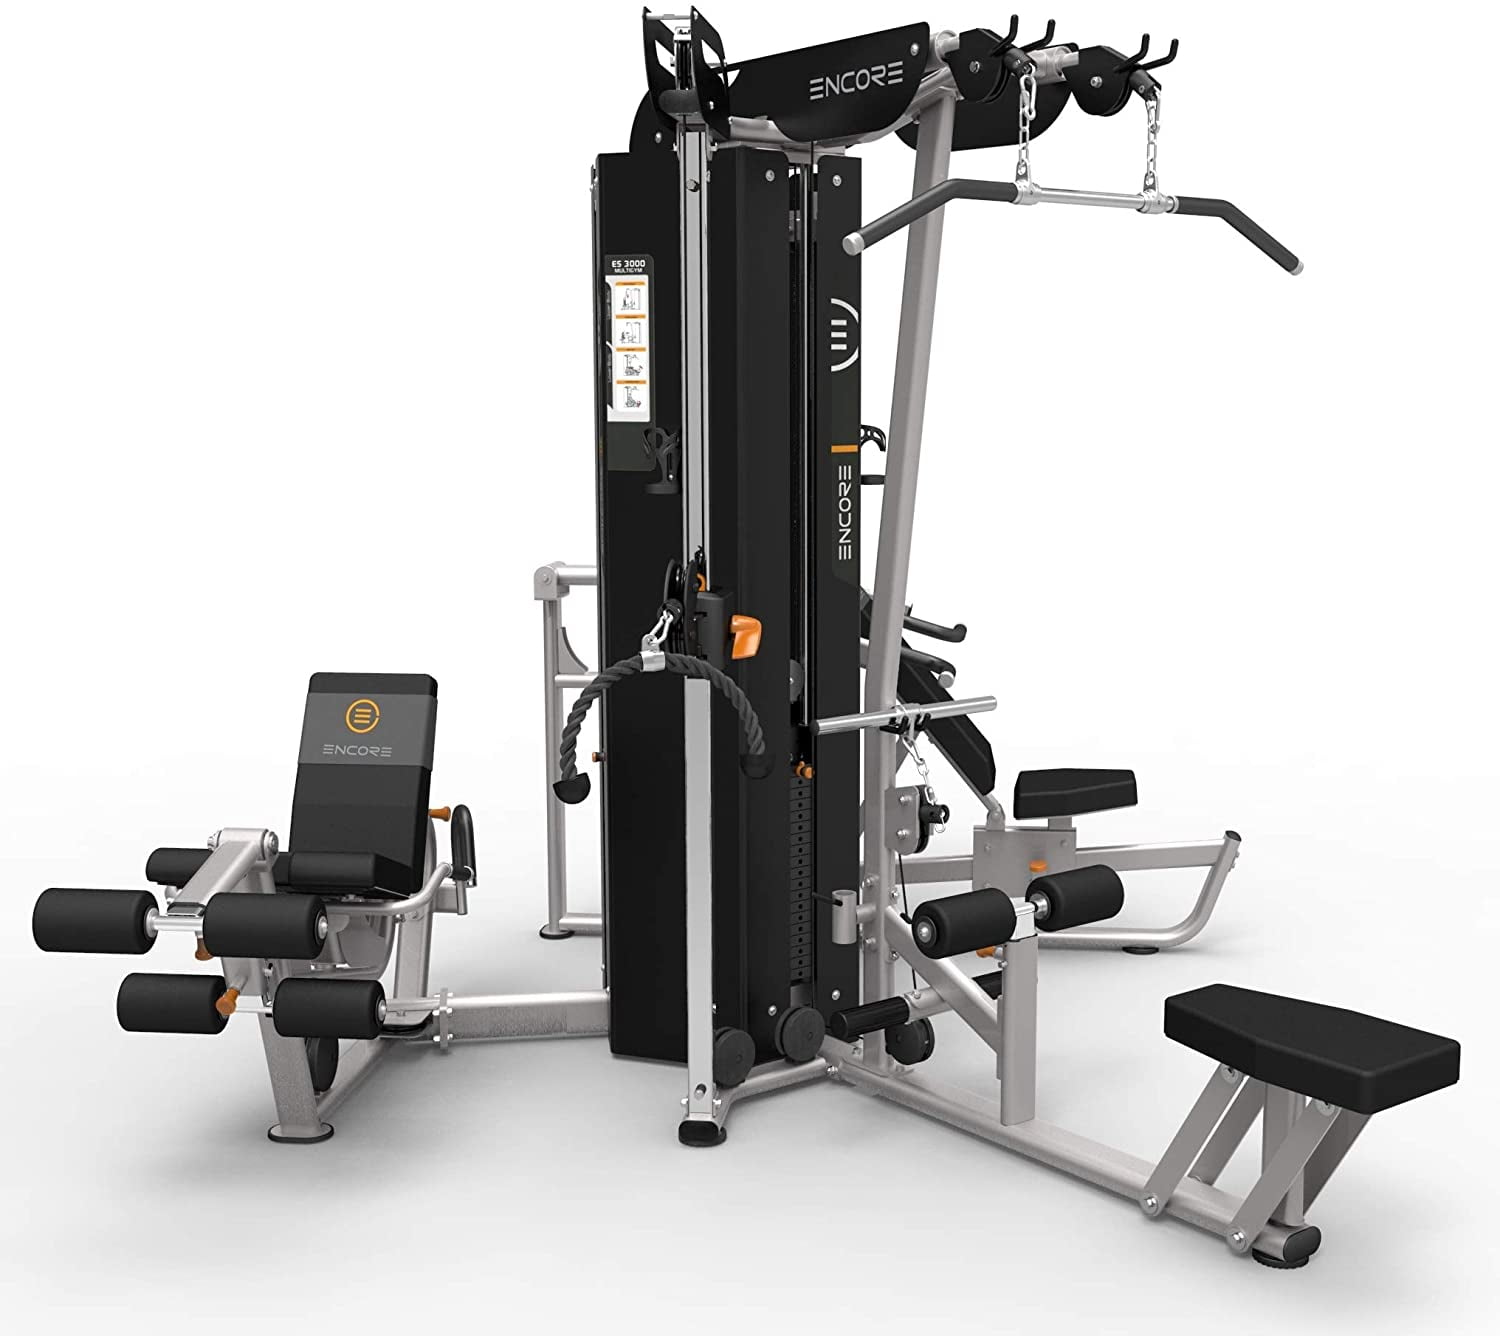 studio Waardeloos Nadeel Encore ES3000 4 Way Multi Station Home And Corporate Gym Included 8 Workout  Modular, Full Body Training, Multifunctional Home Gym System - Walmart.com